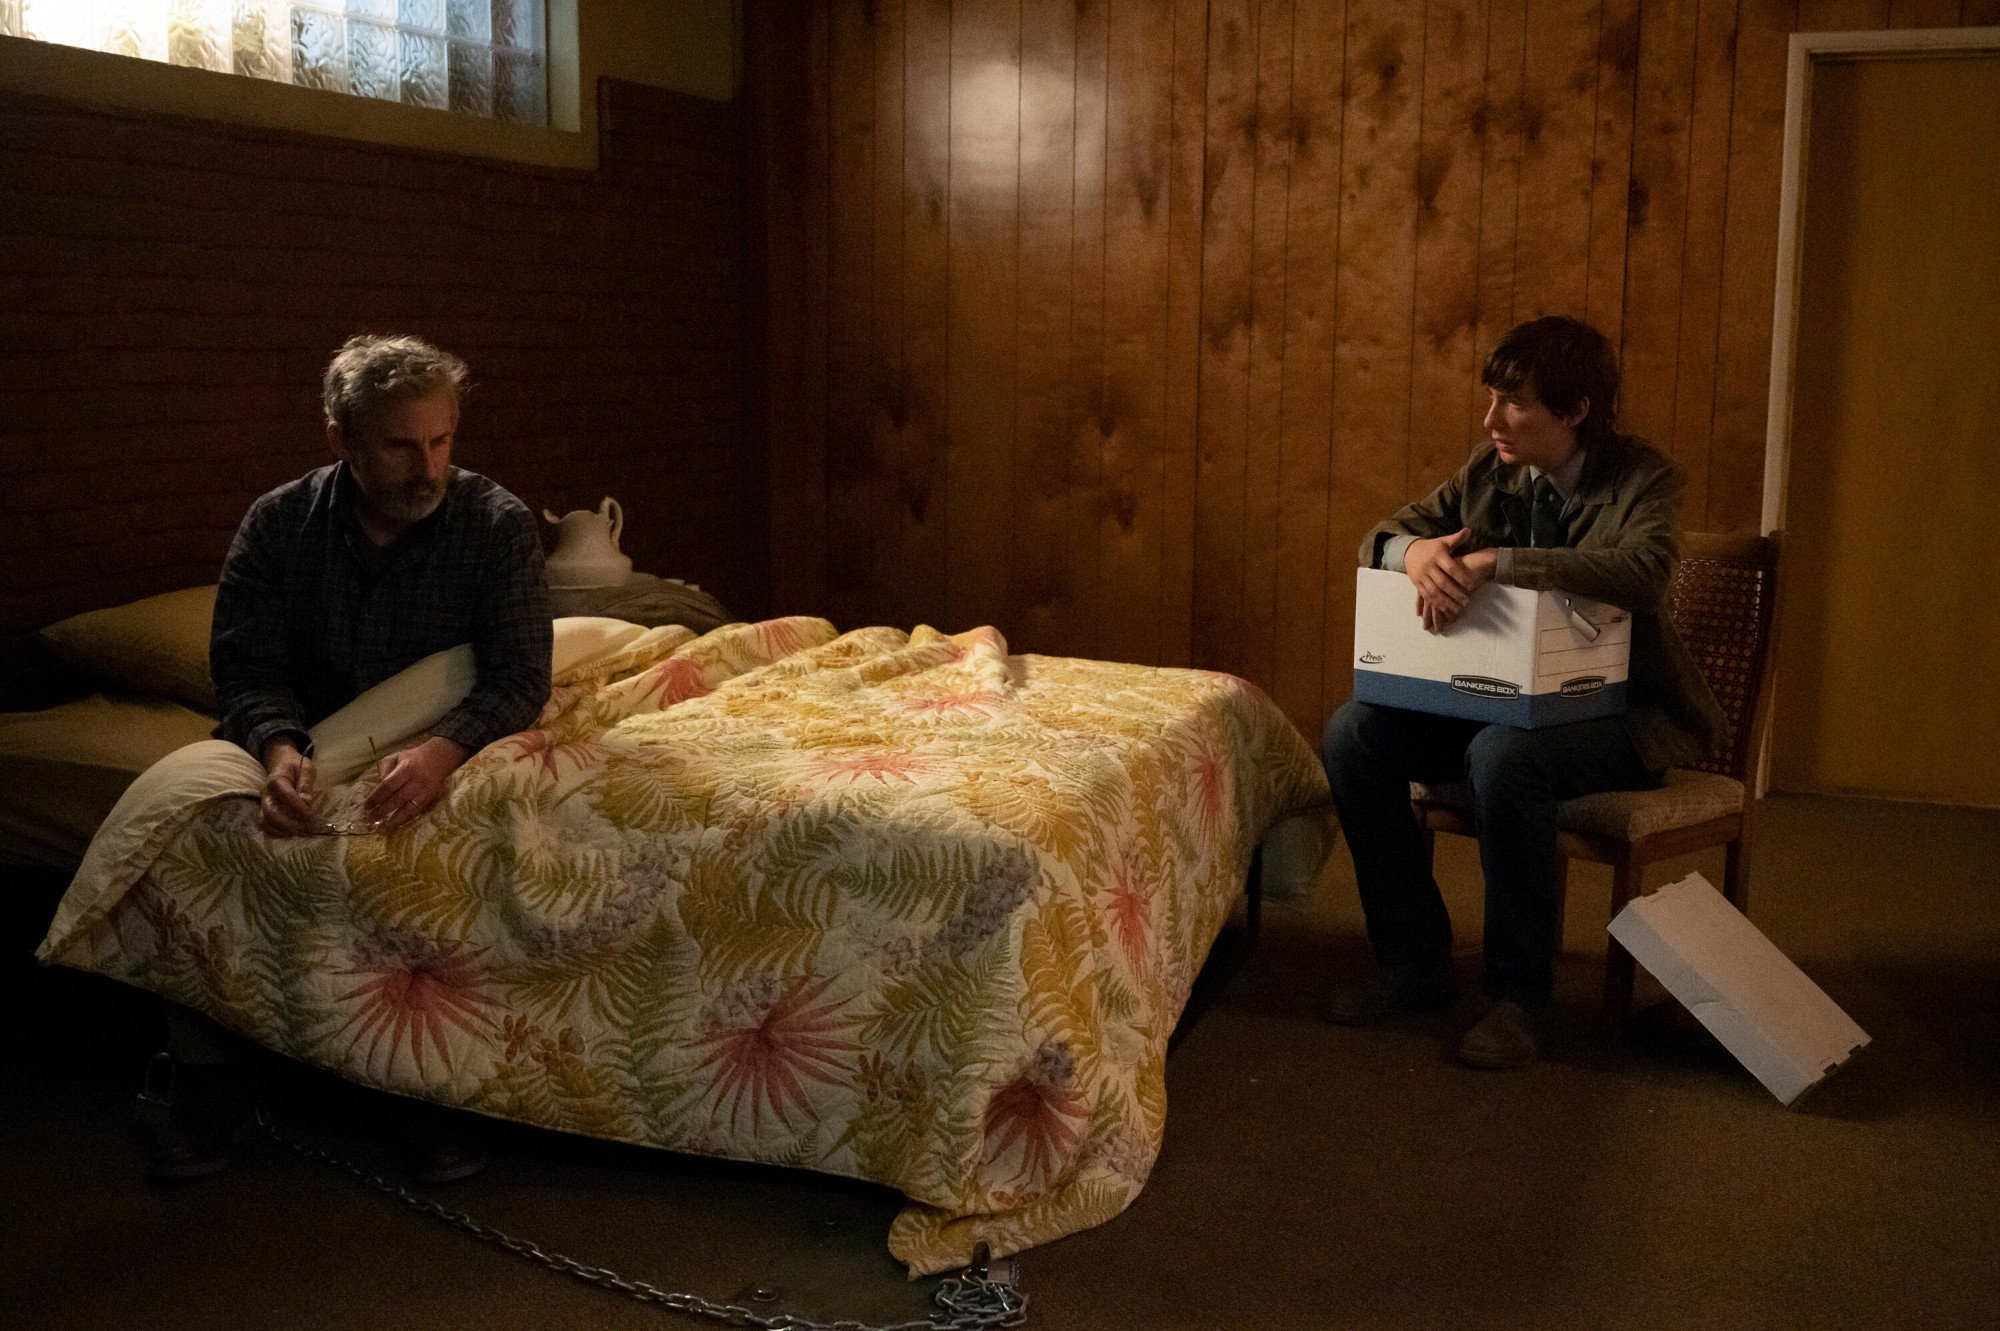 Steve Carell and Domhnall Gleeson as Alan Strauss and Sam Fortner in 'The Patient' for our article about episode 6 and its release date on Hulu. Alan is sittingg beneath the covers in a bed, and Sam is sitting on a chair next to the bed and holding a box.